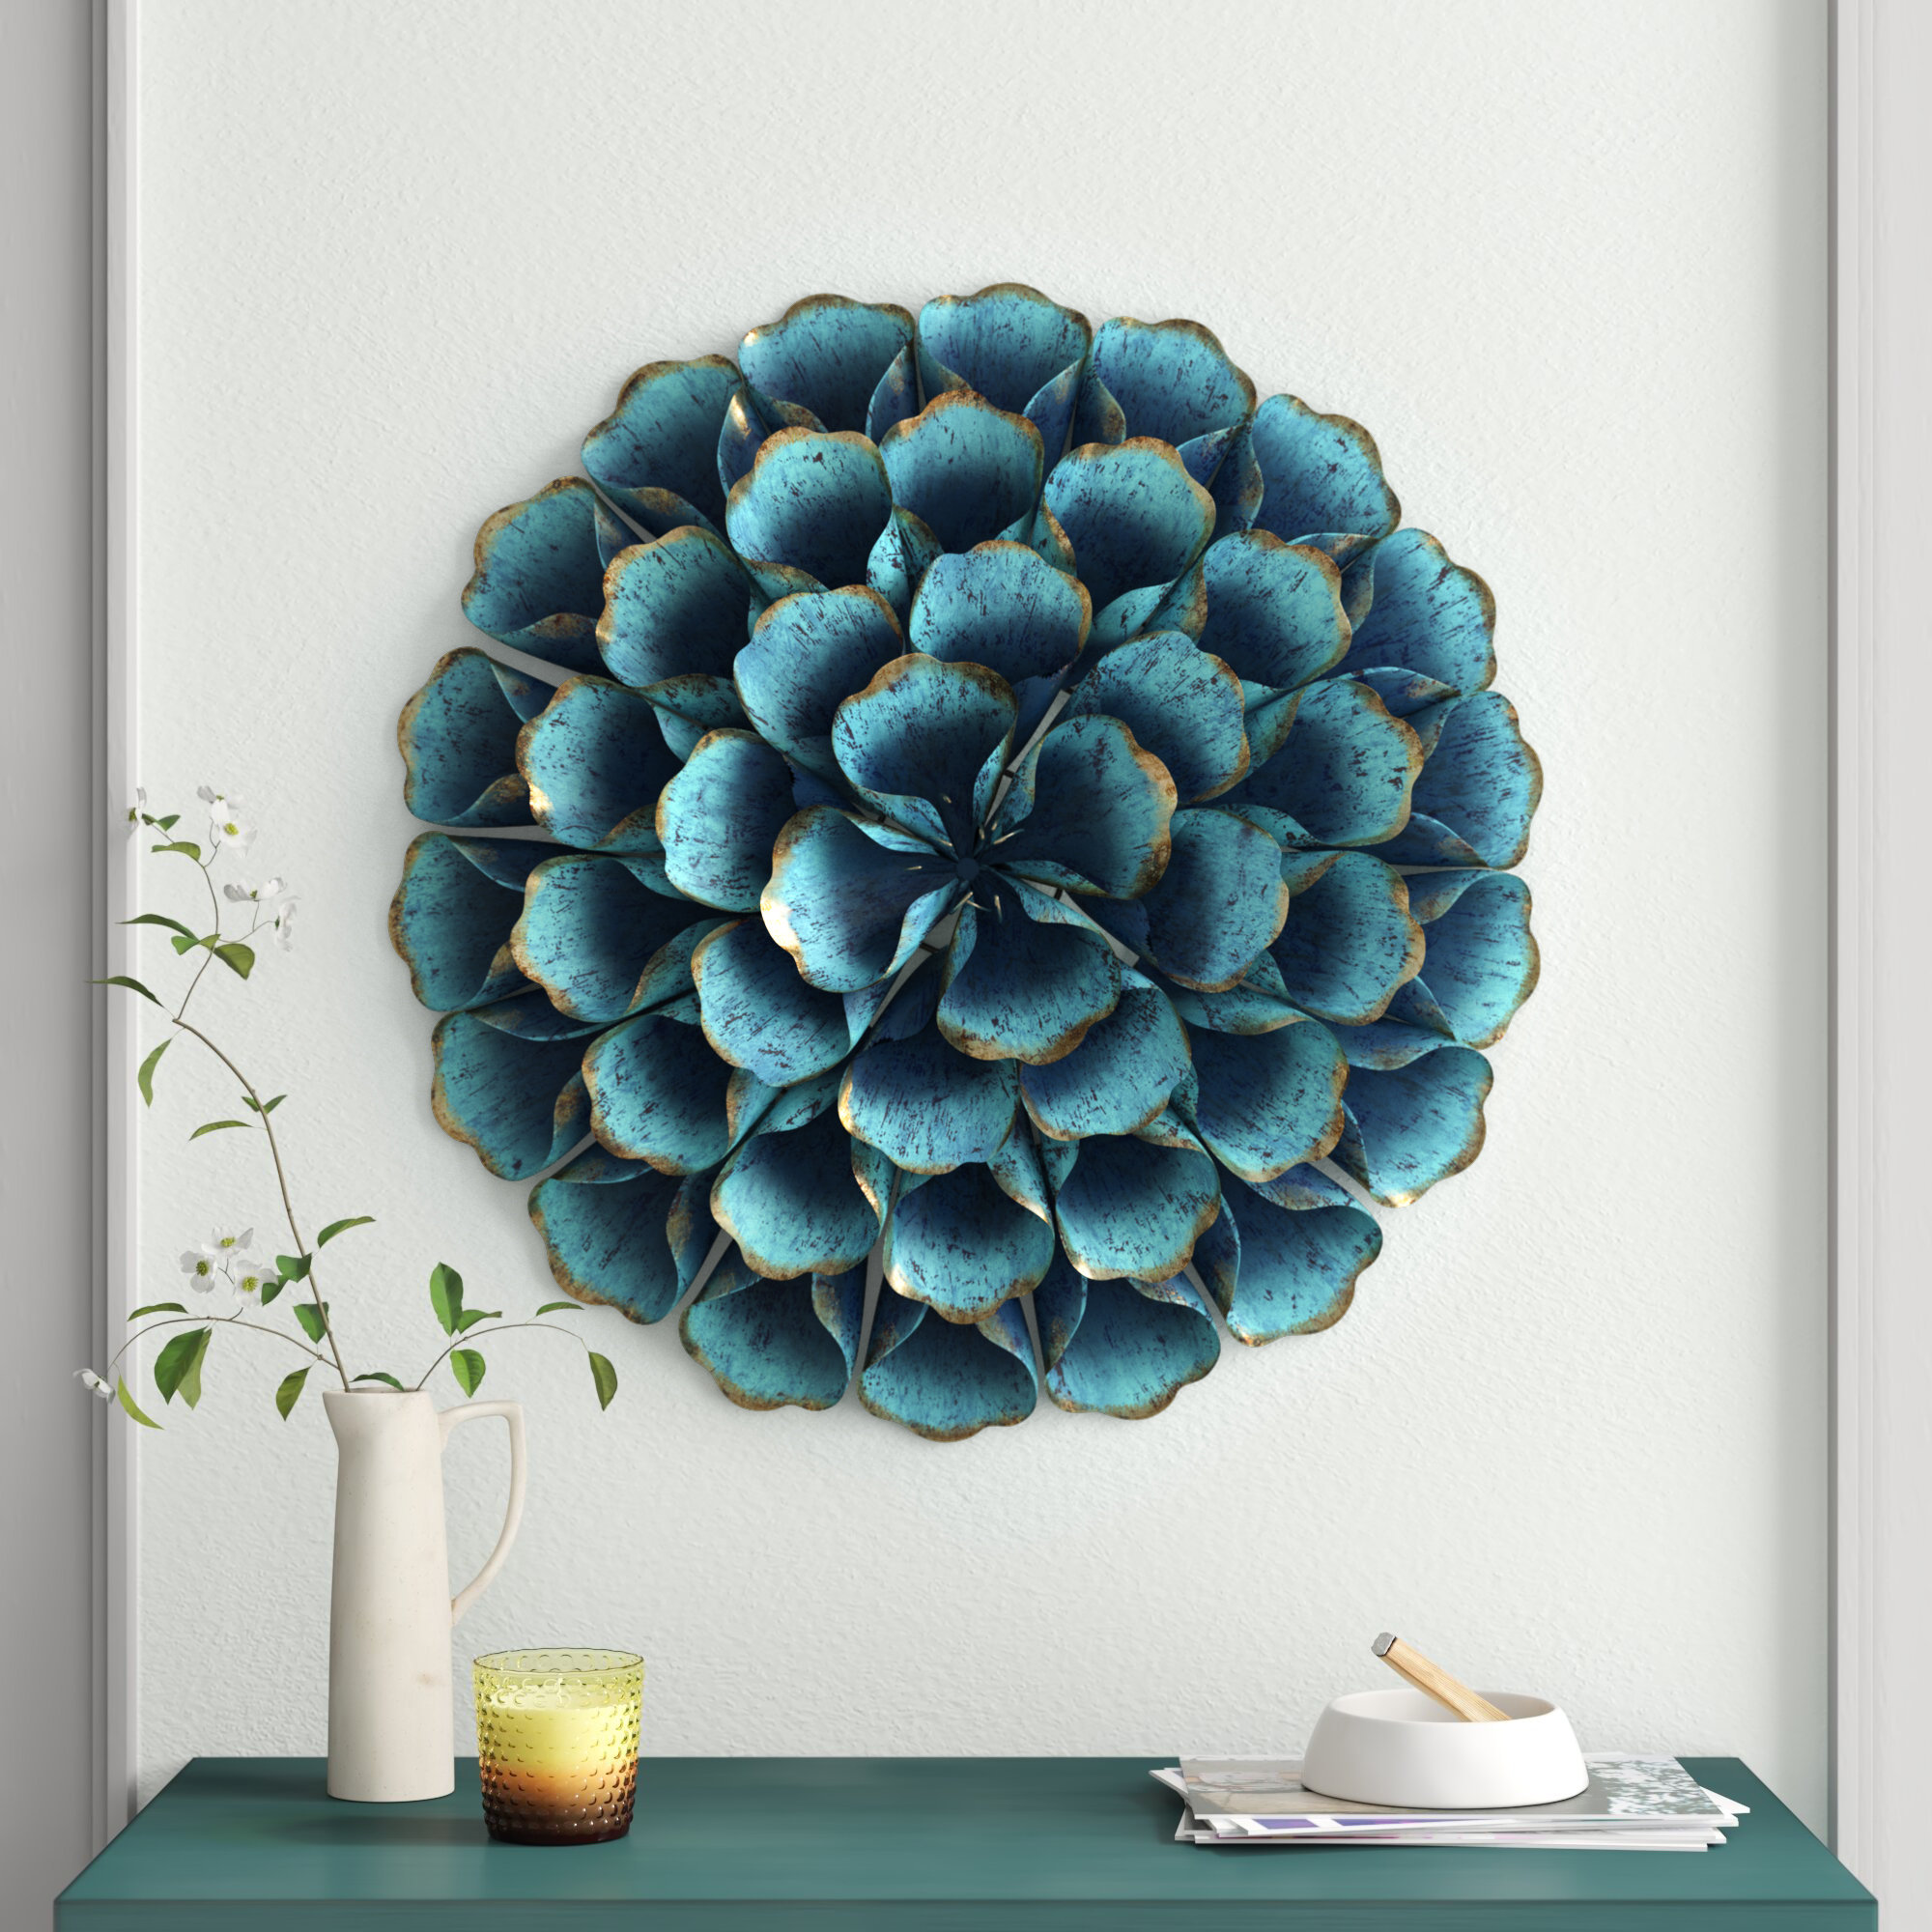 Teen Girl Room Decor Set of 3 Canvas or Prints Turquoise and Grey Room  Decor for Teen Girl Abstract Floral Art Teal Gray Wall Art 